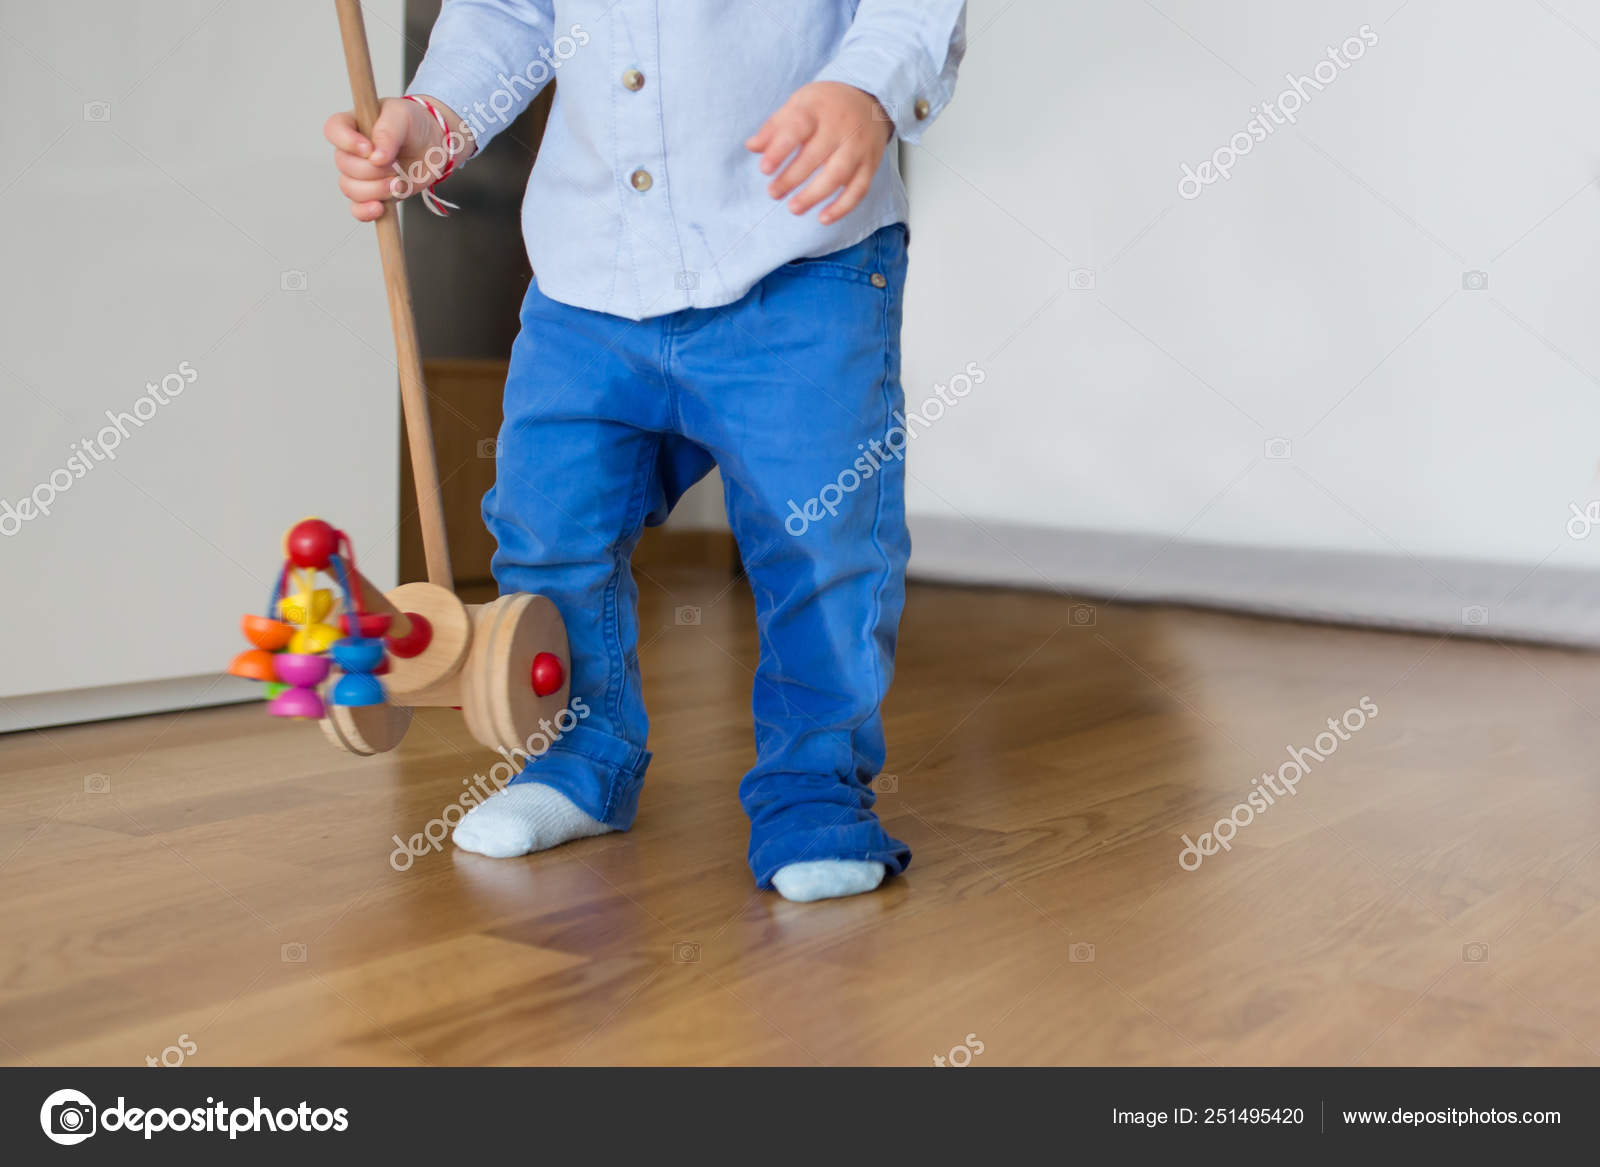 Little toddler child, boy, pee in his pants while playing with